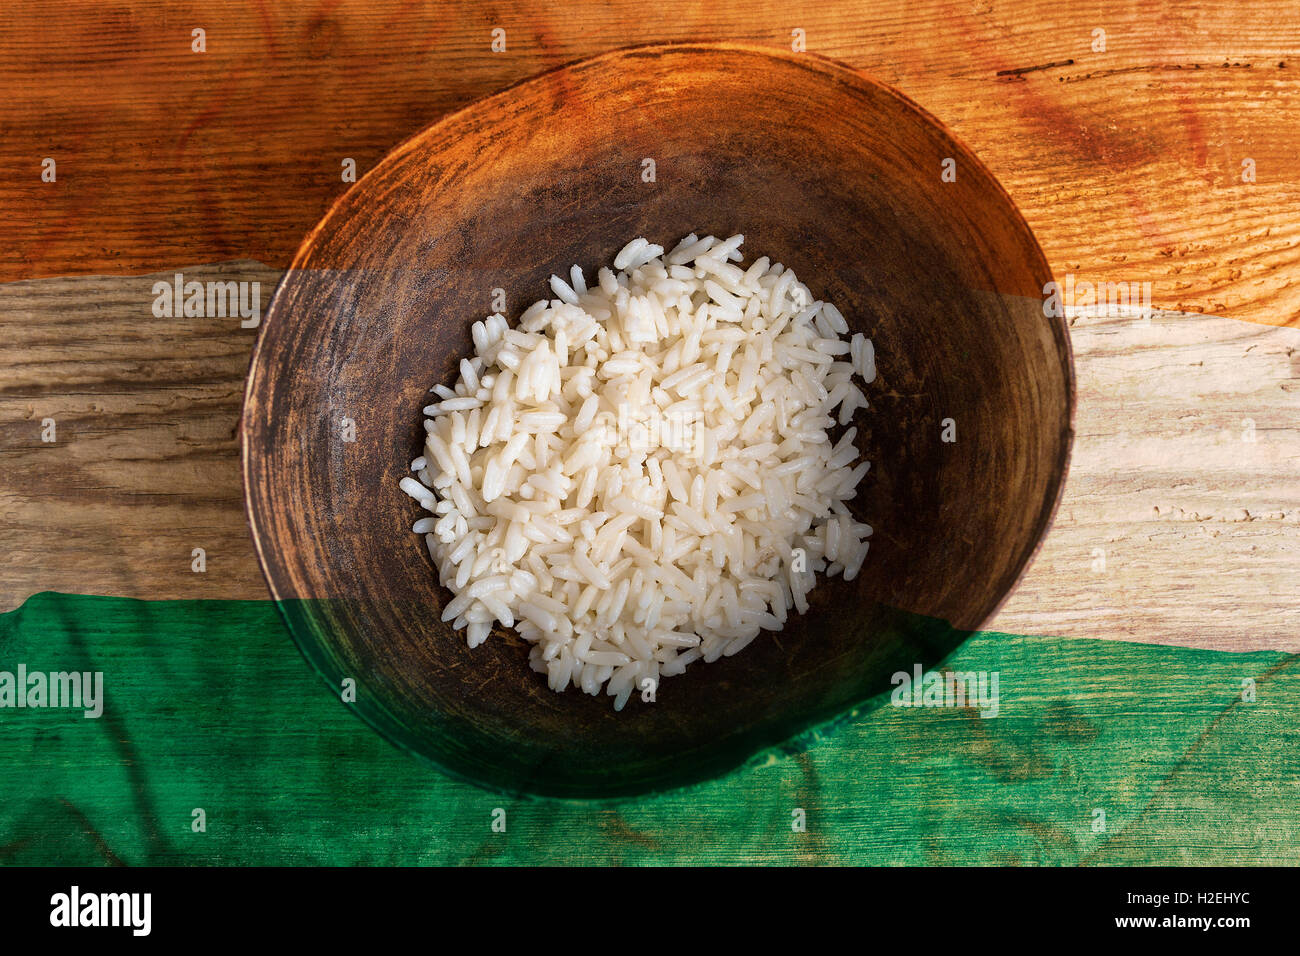 Poverty concept, bowl of rice with Indian flag on wooden background Stock Photo